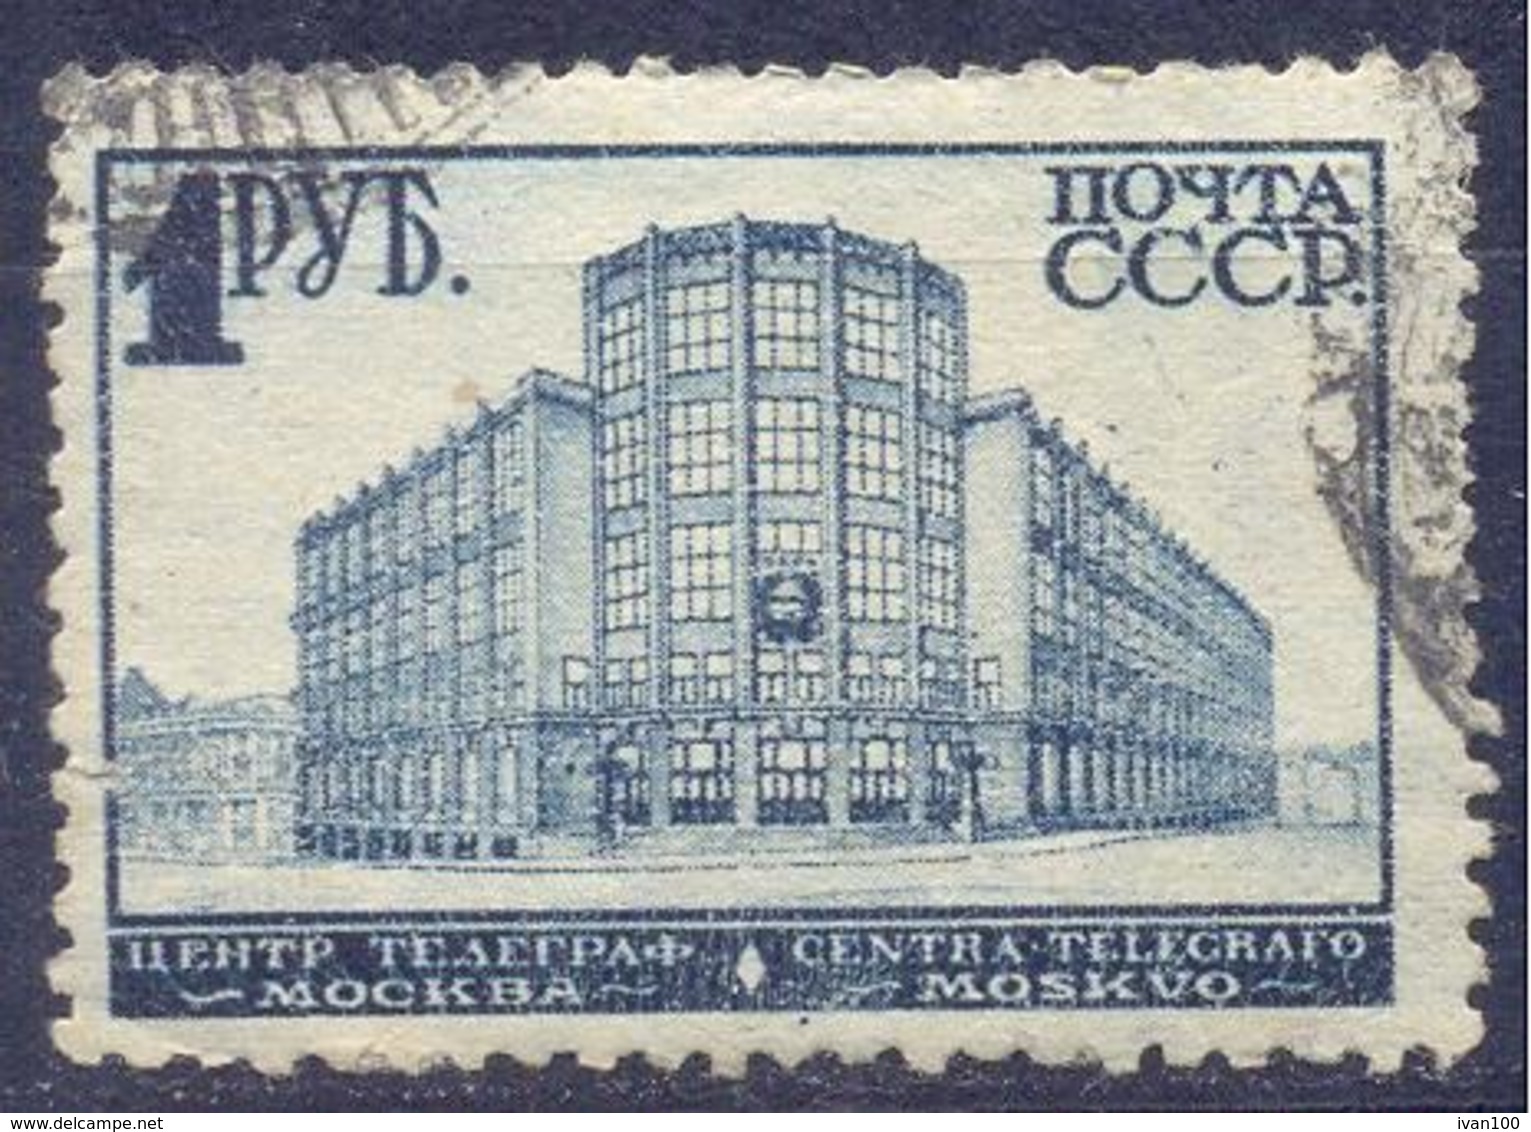 1930. USSR/Russia, Definitive, Central Telegraph, Moscow, Mich. 392, 1v, Used - Gebruikt